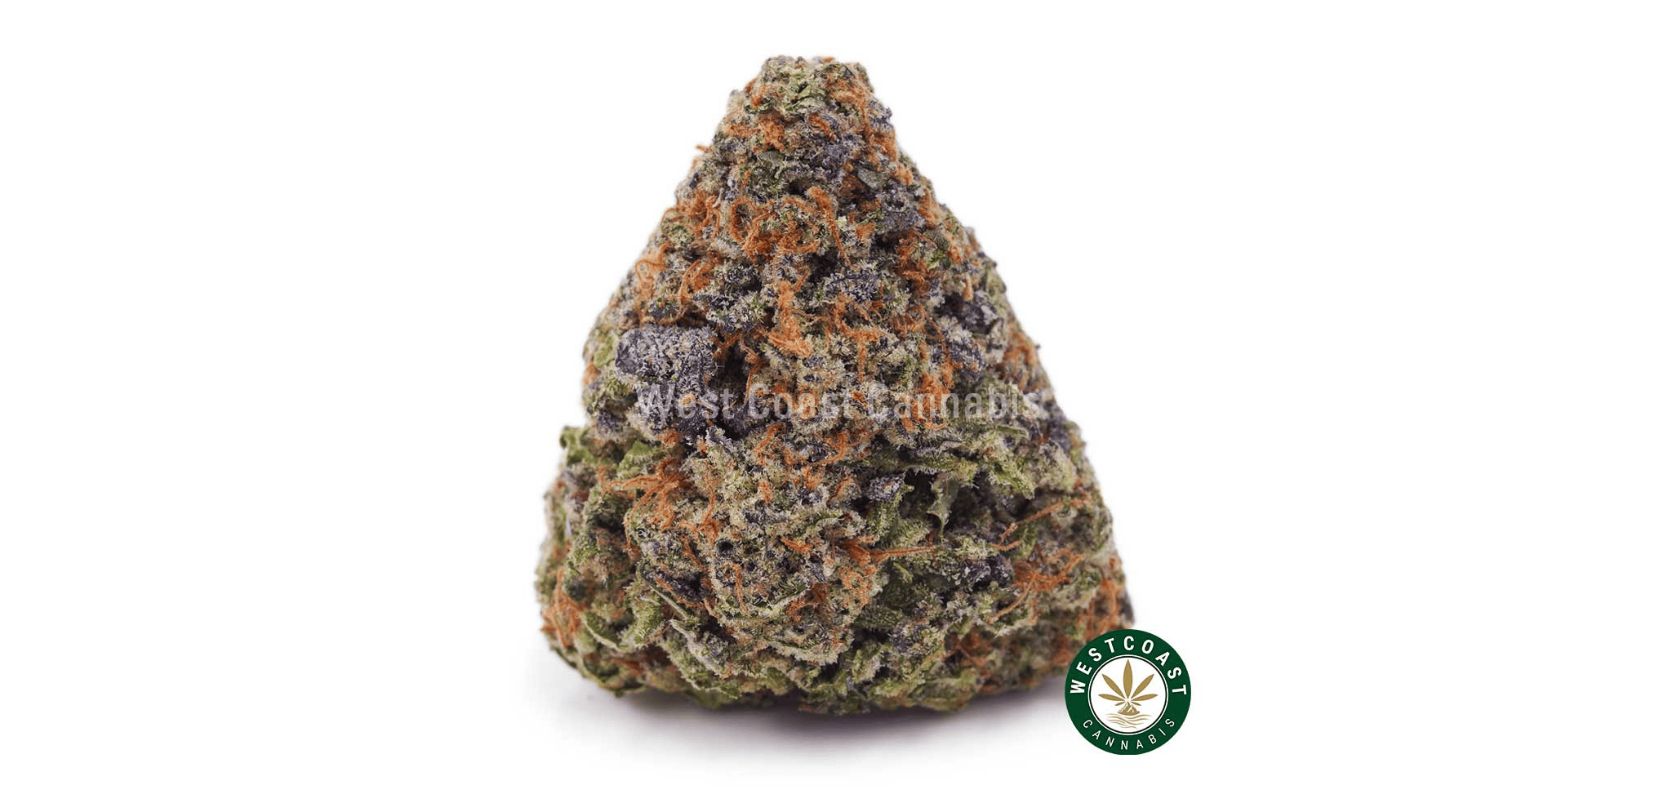 Buy weed online in Canada like Tangerine Dream AAAA+ for just $10.00.